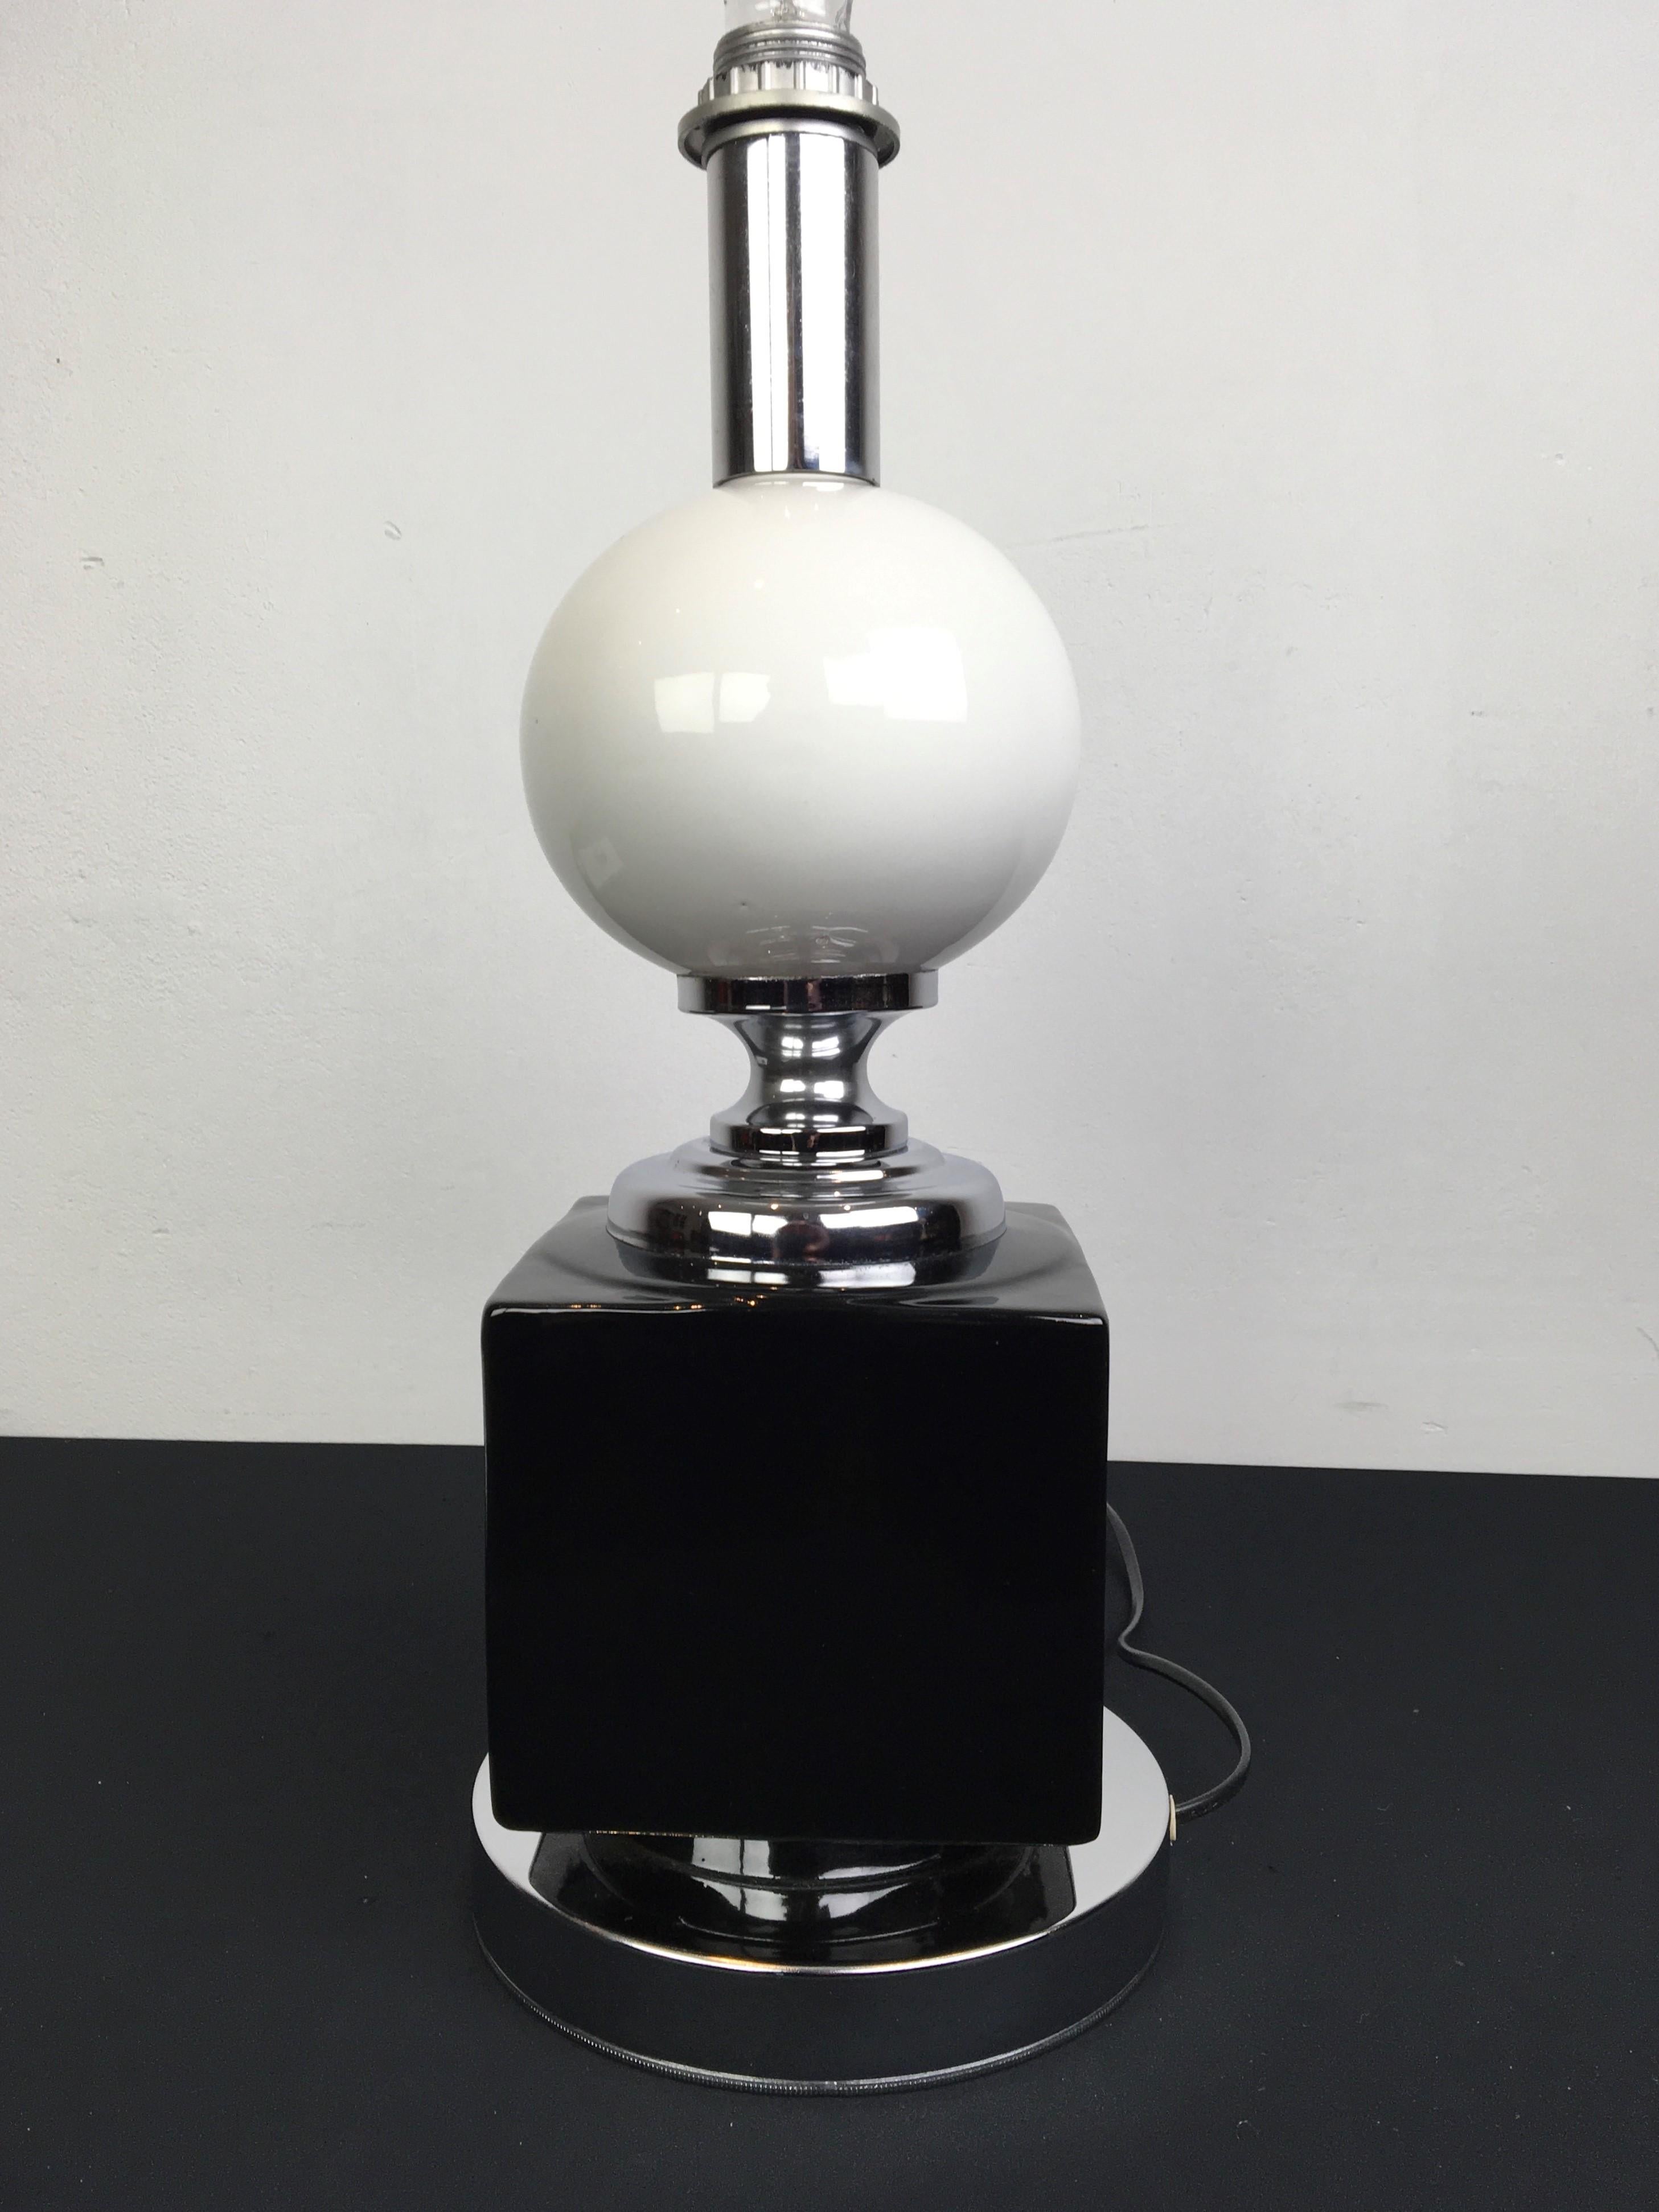 Ceramic with Chrome Geometric Table Lamp, 1970s For Sale 2